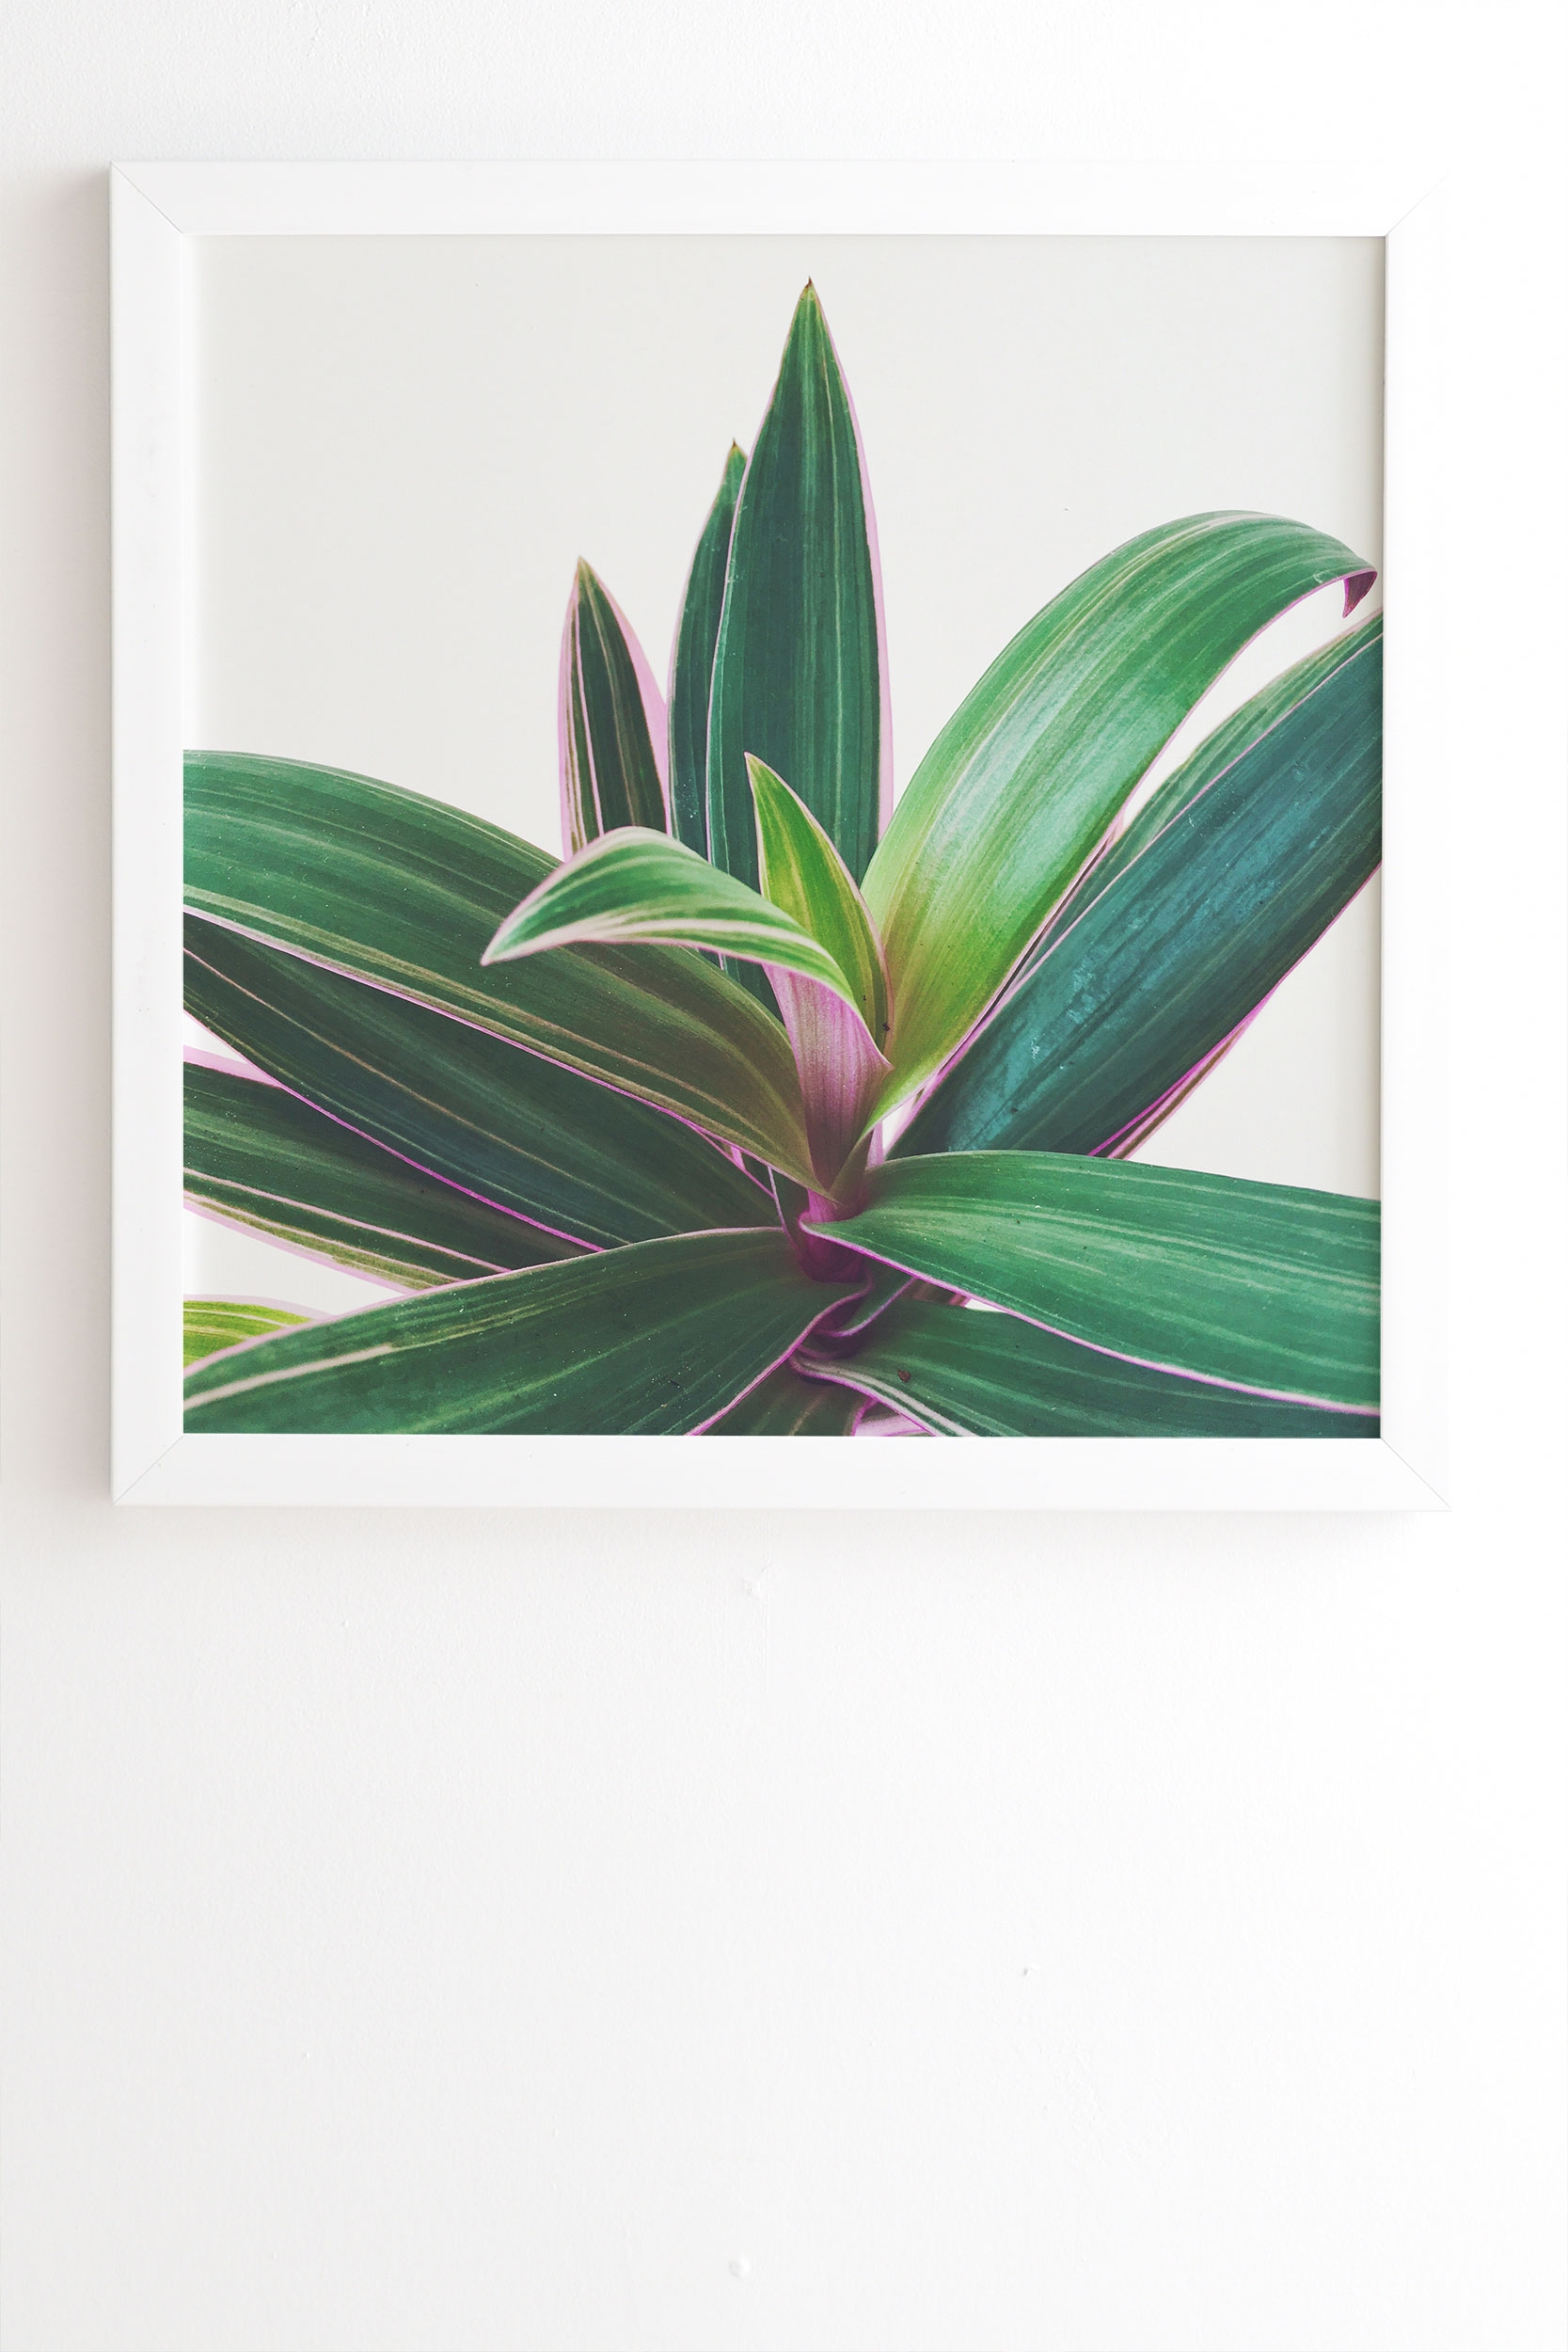 Oyster Plant by Cassia Beck - Framed Wall Art Basic White 19" x 22.4" - Image 1